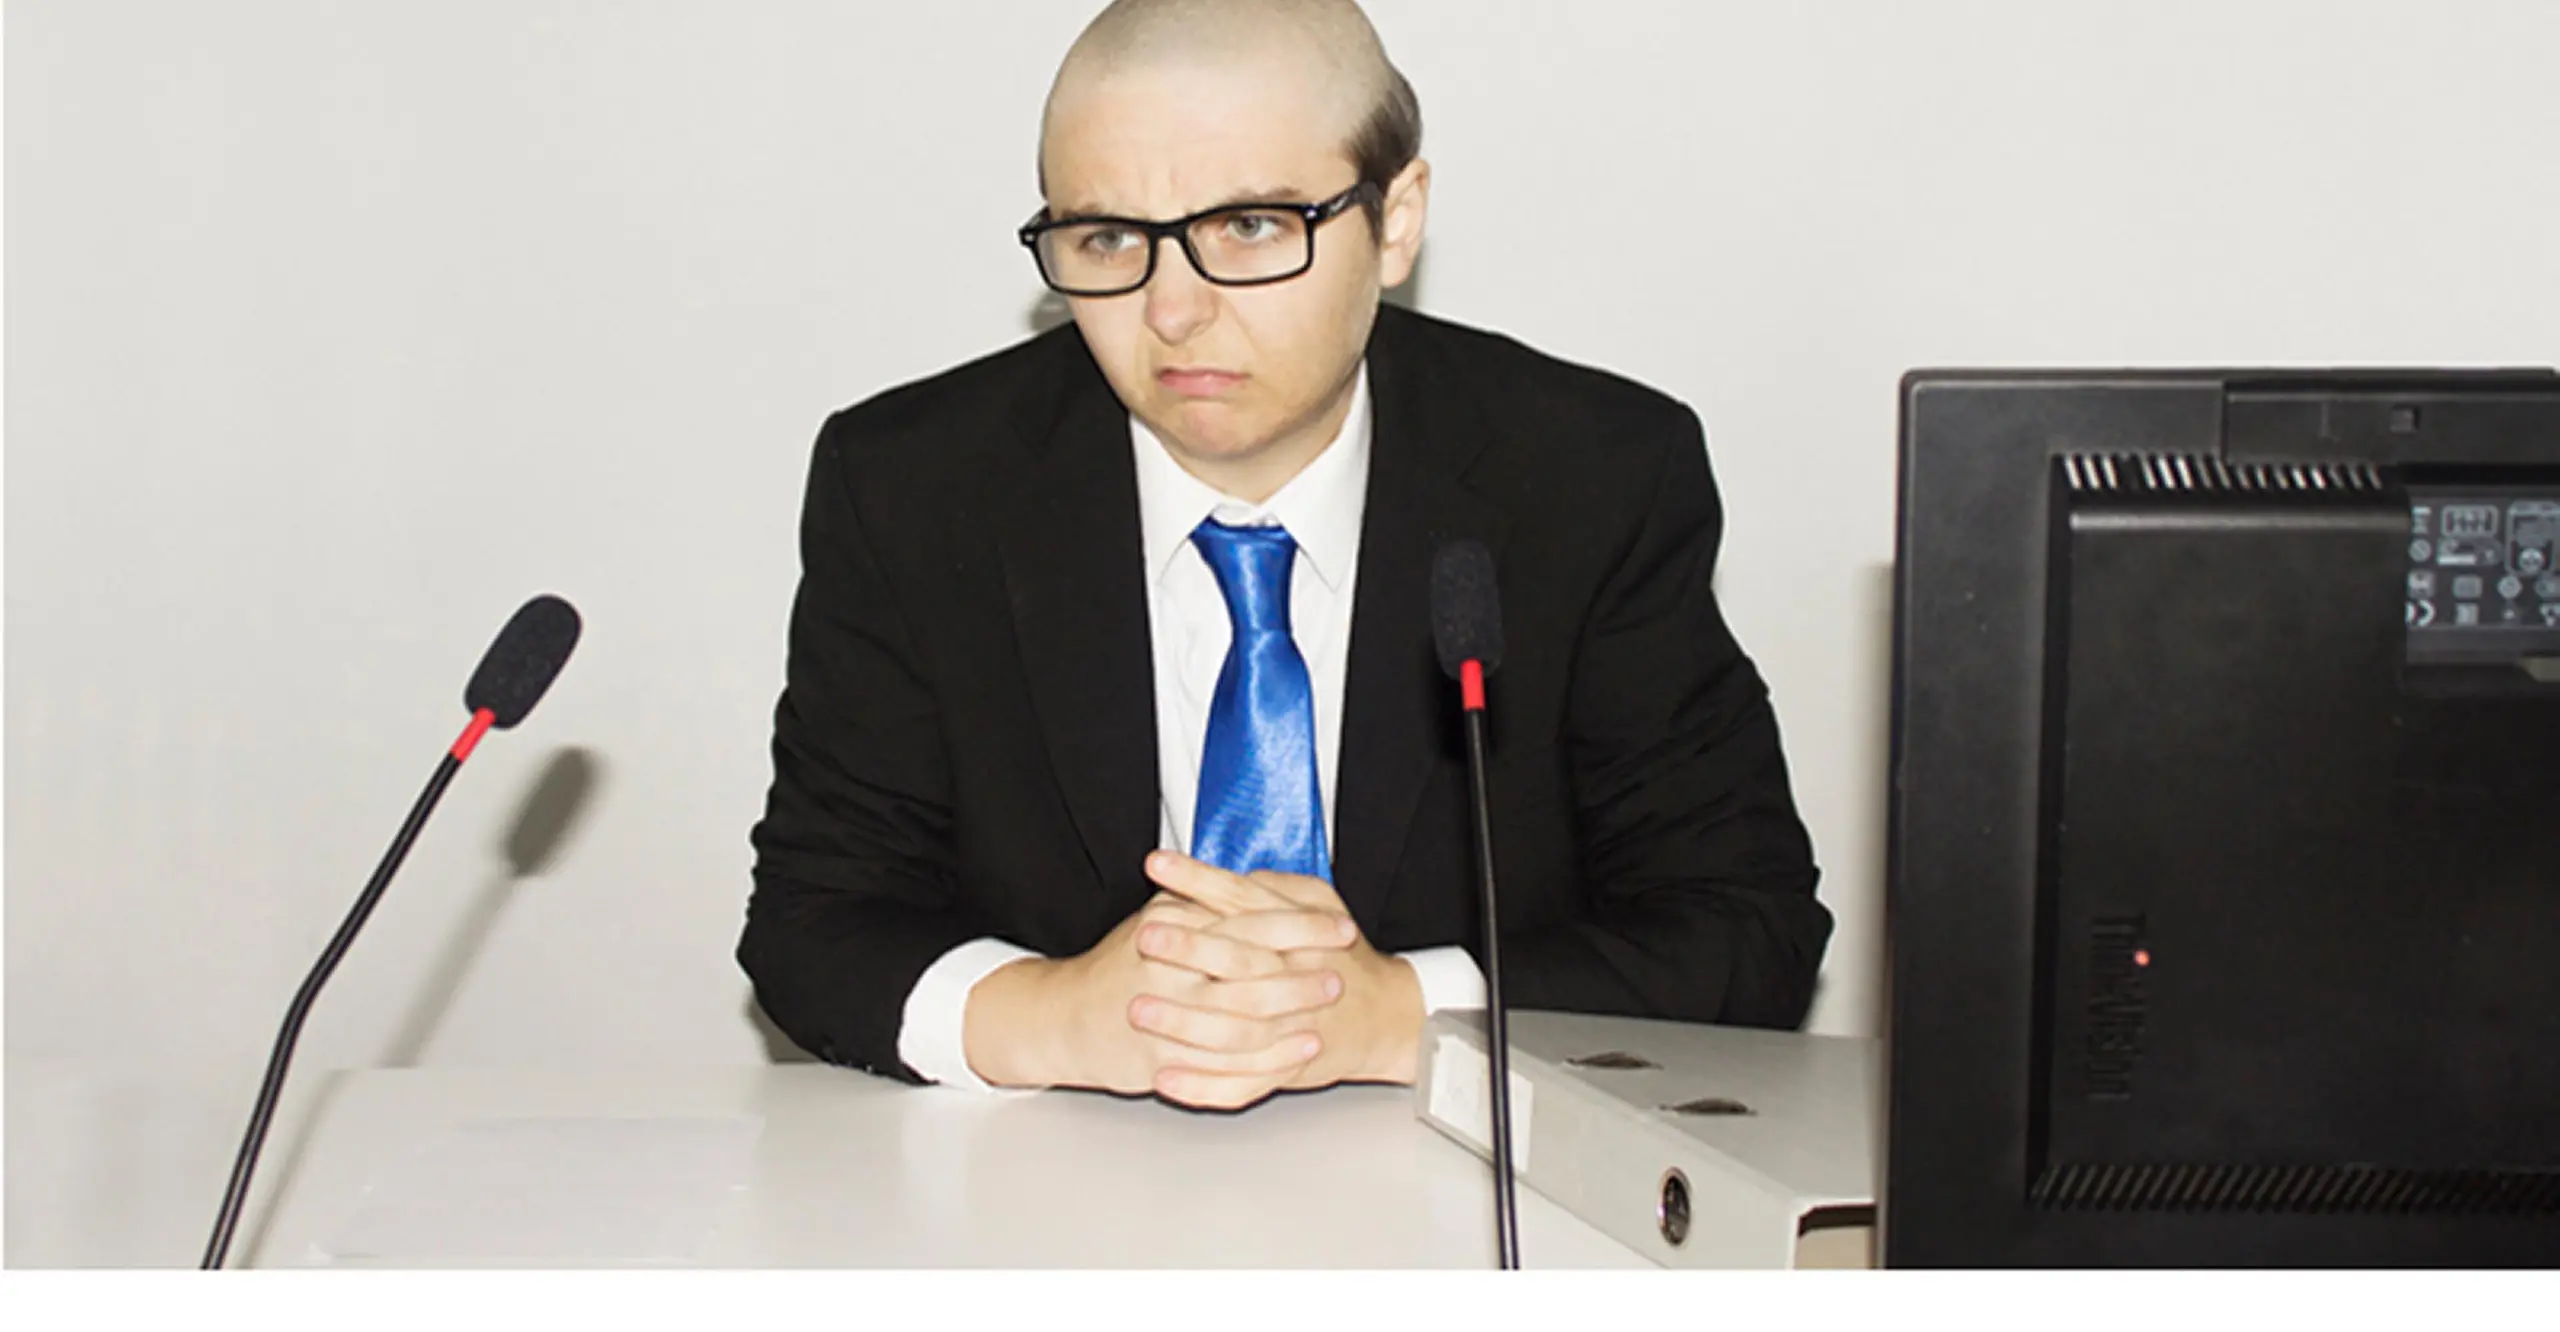 A person with no hair sat at a desk wearing a suit.